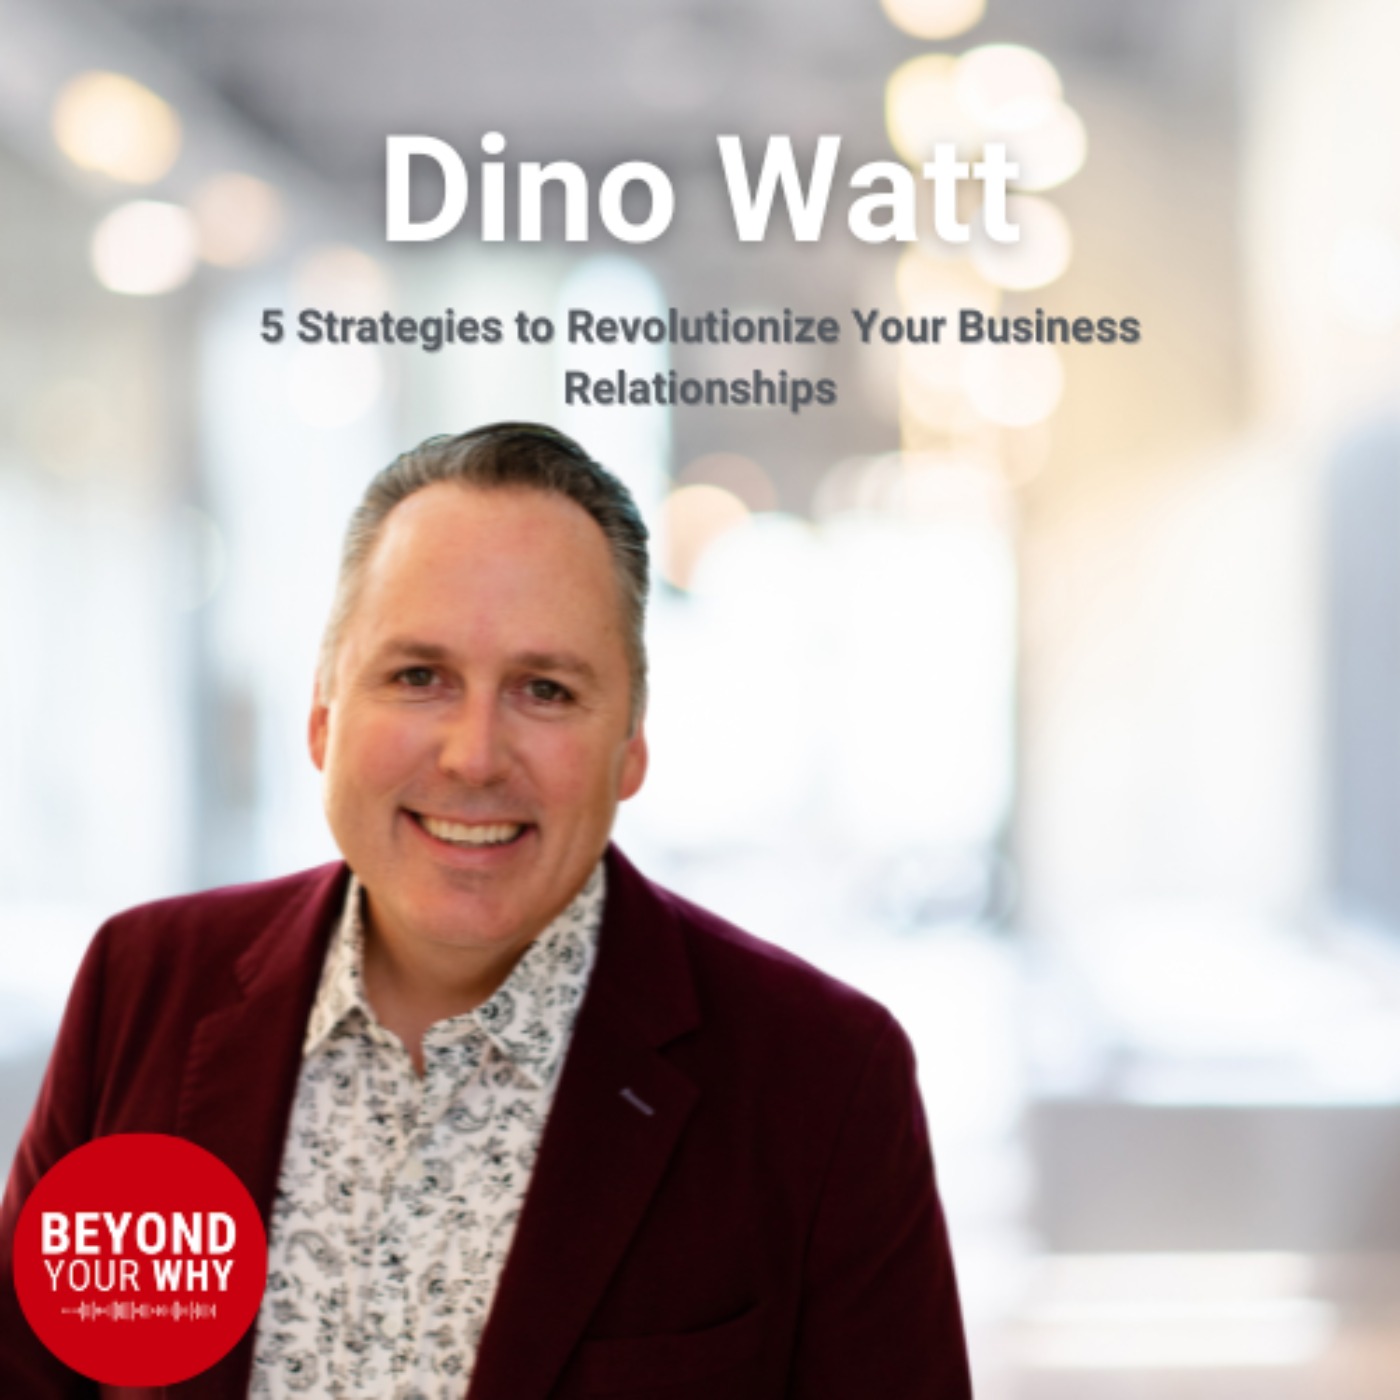 5 Strategies to Revolutionize Your Business Relationships: Insights from Dino Watt